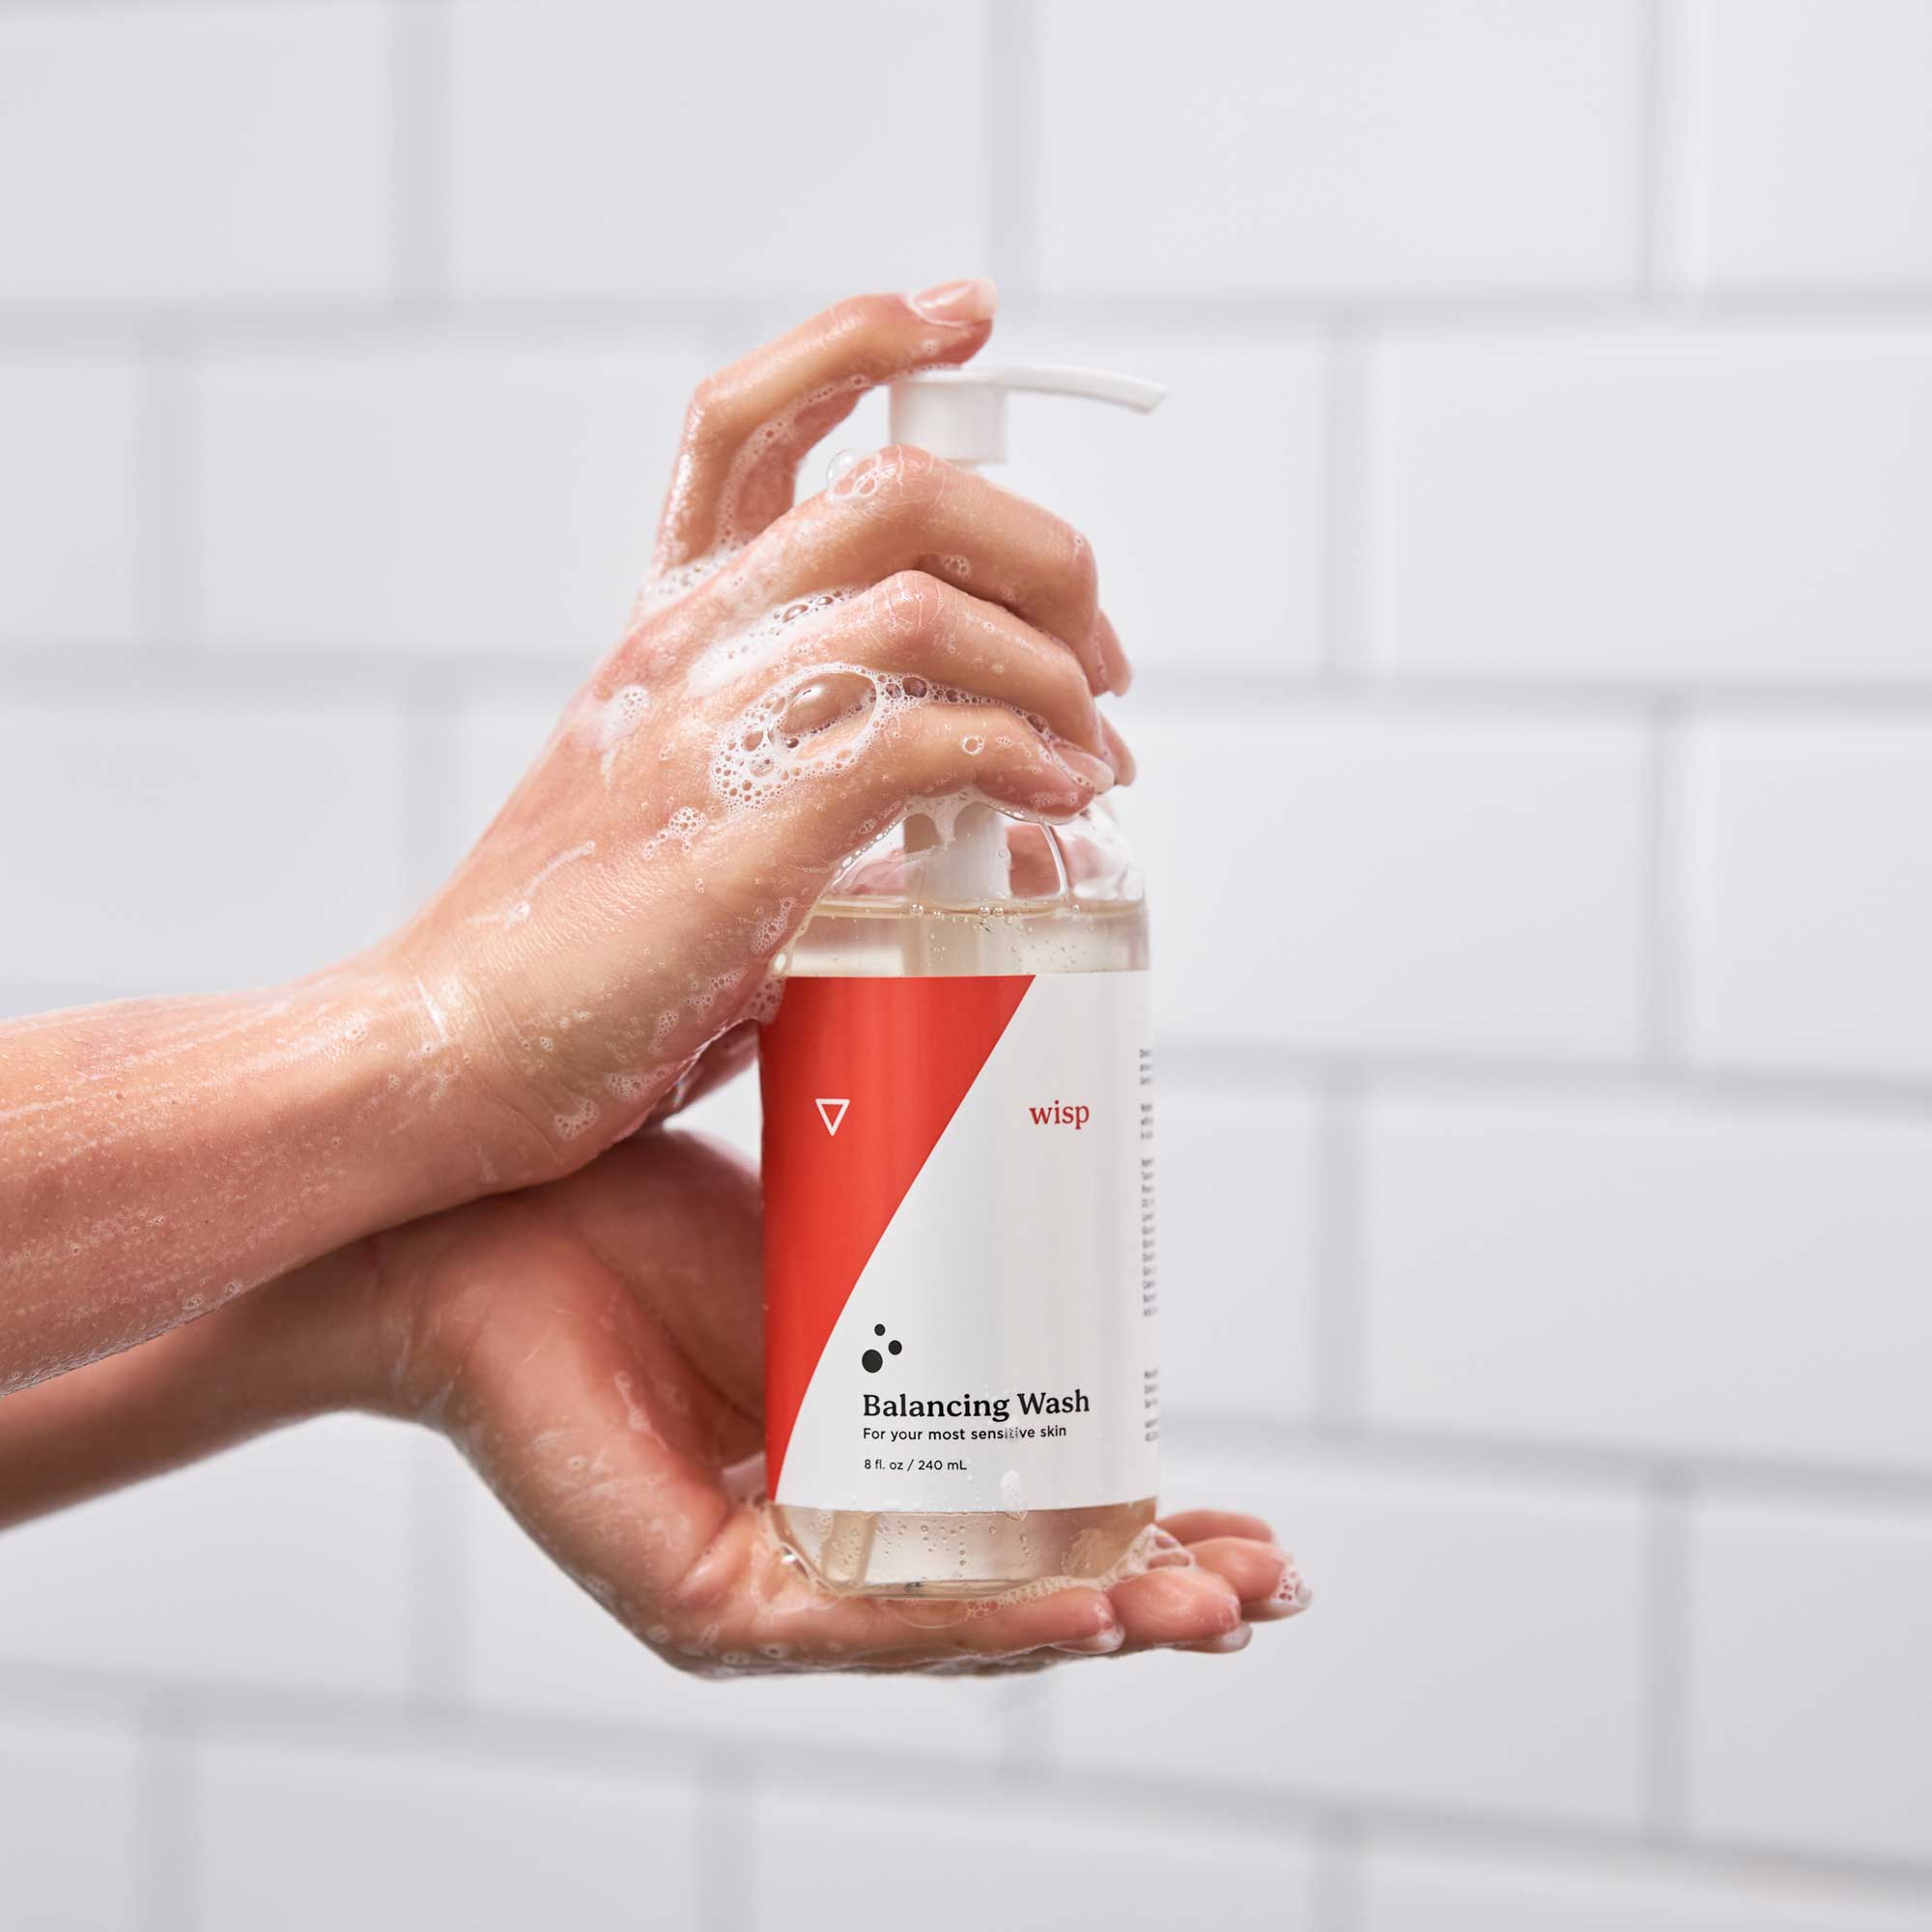 Hands covered in soap suds holding a bottle of Wisp Balancing Wash against a white tile wall